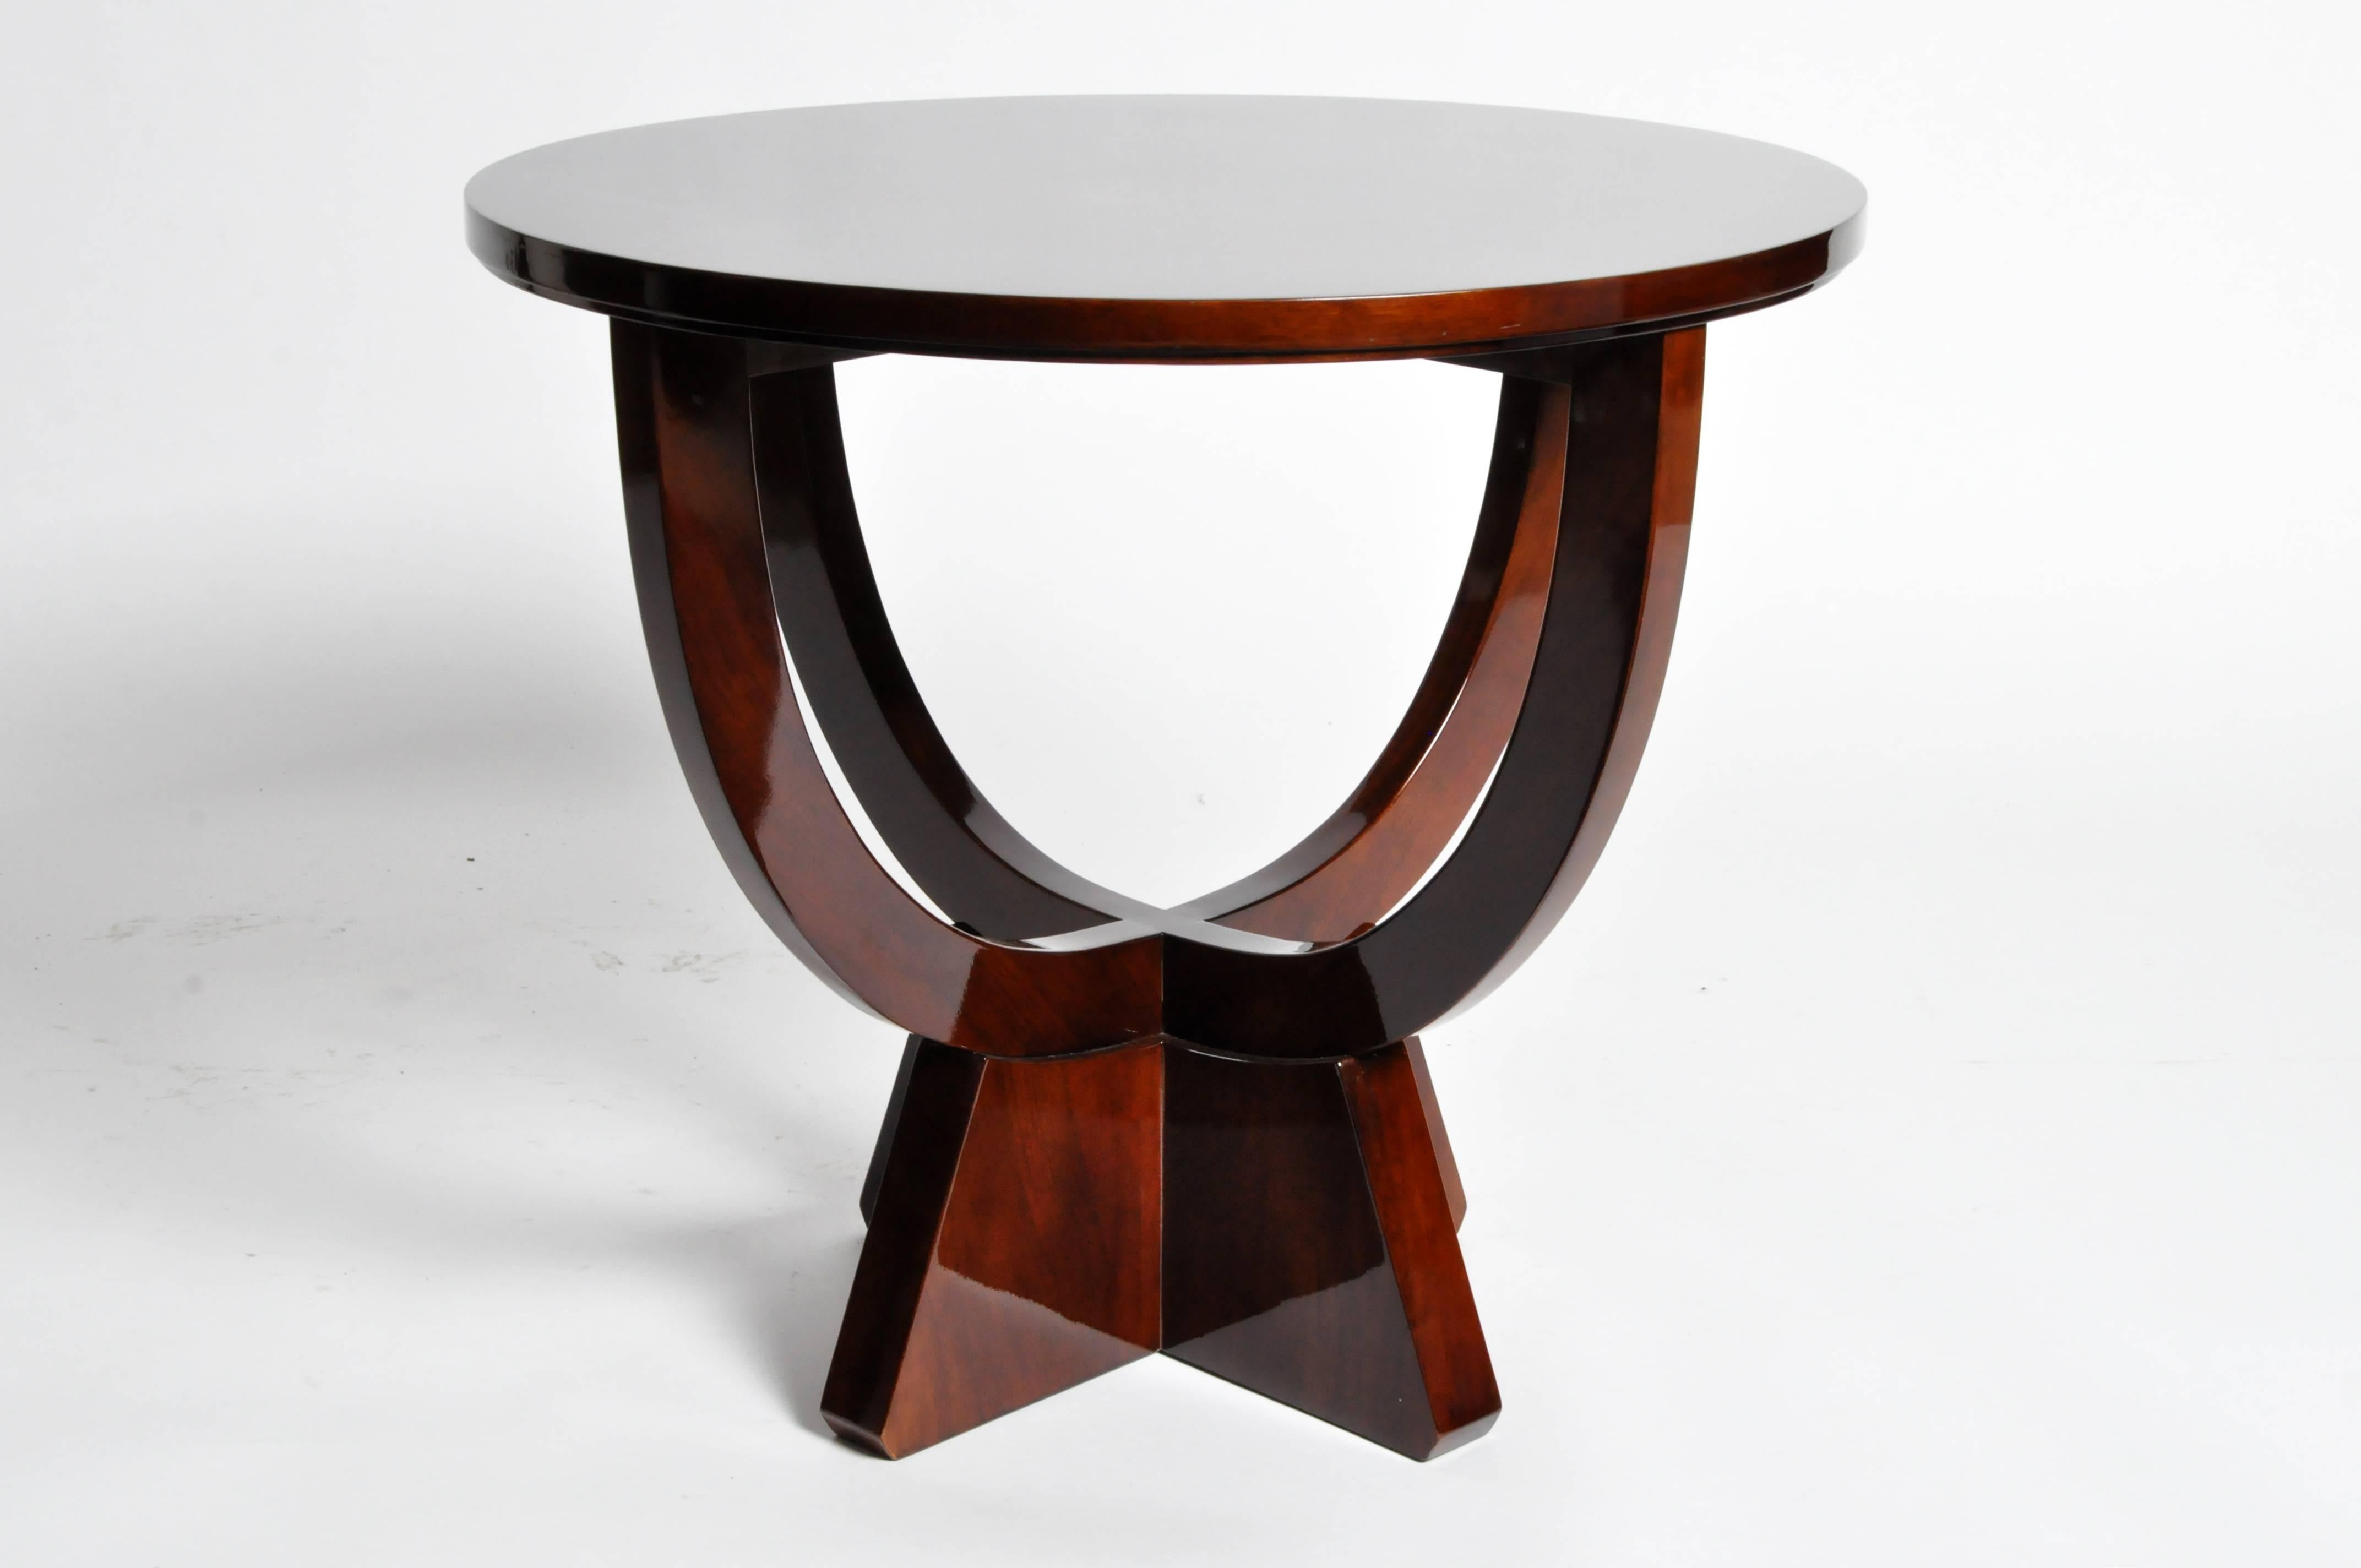 This elegant newly made round table is from Hungary and is made from walnut veneer.